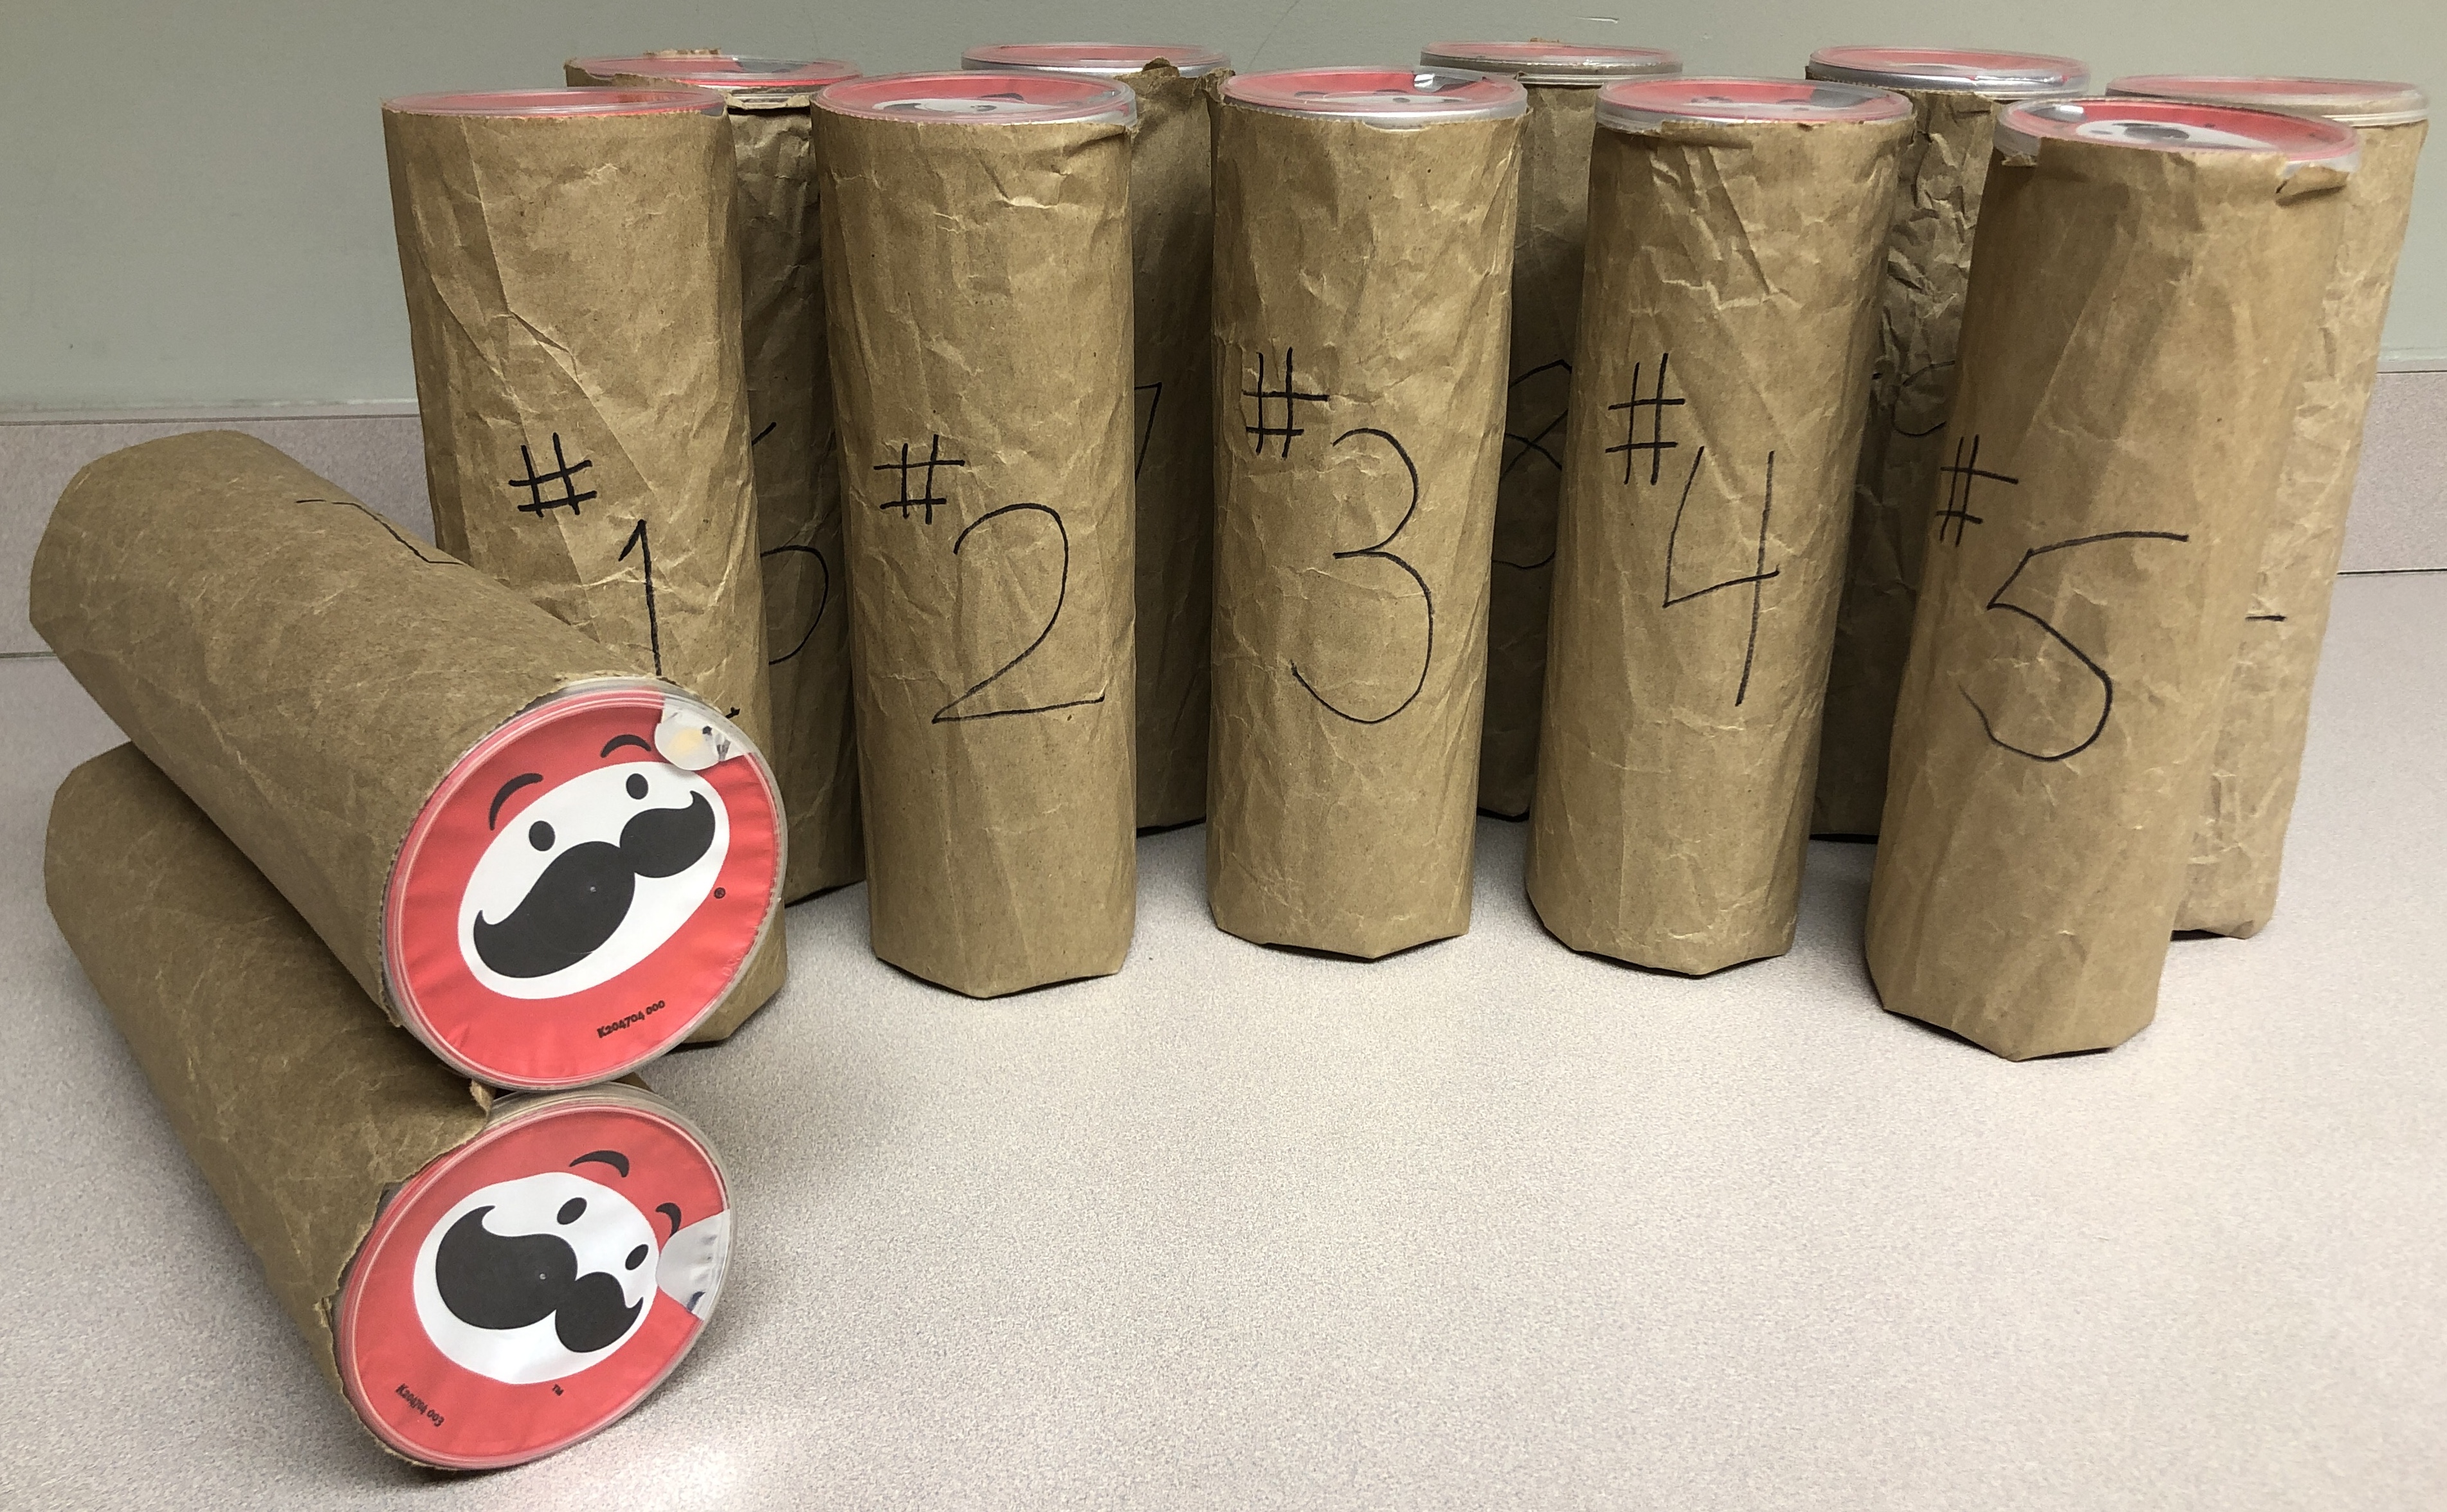 12 Pringles cans all wrapped in brown paper and numbered 1~12